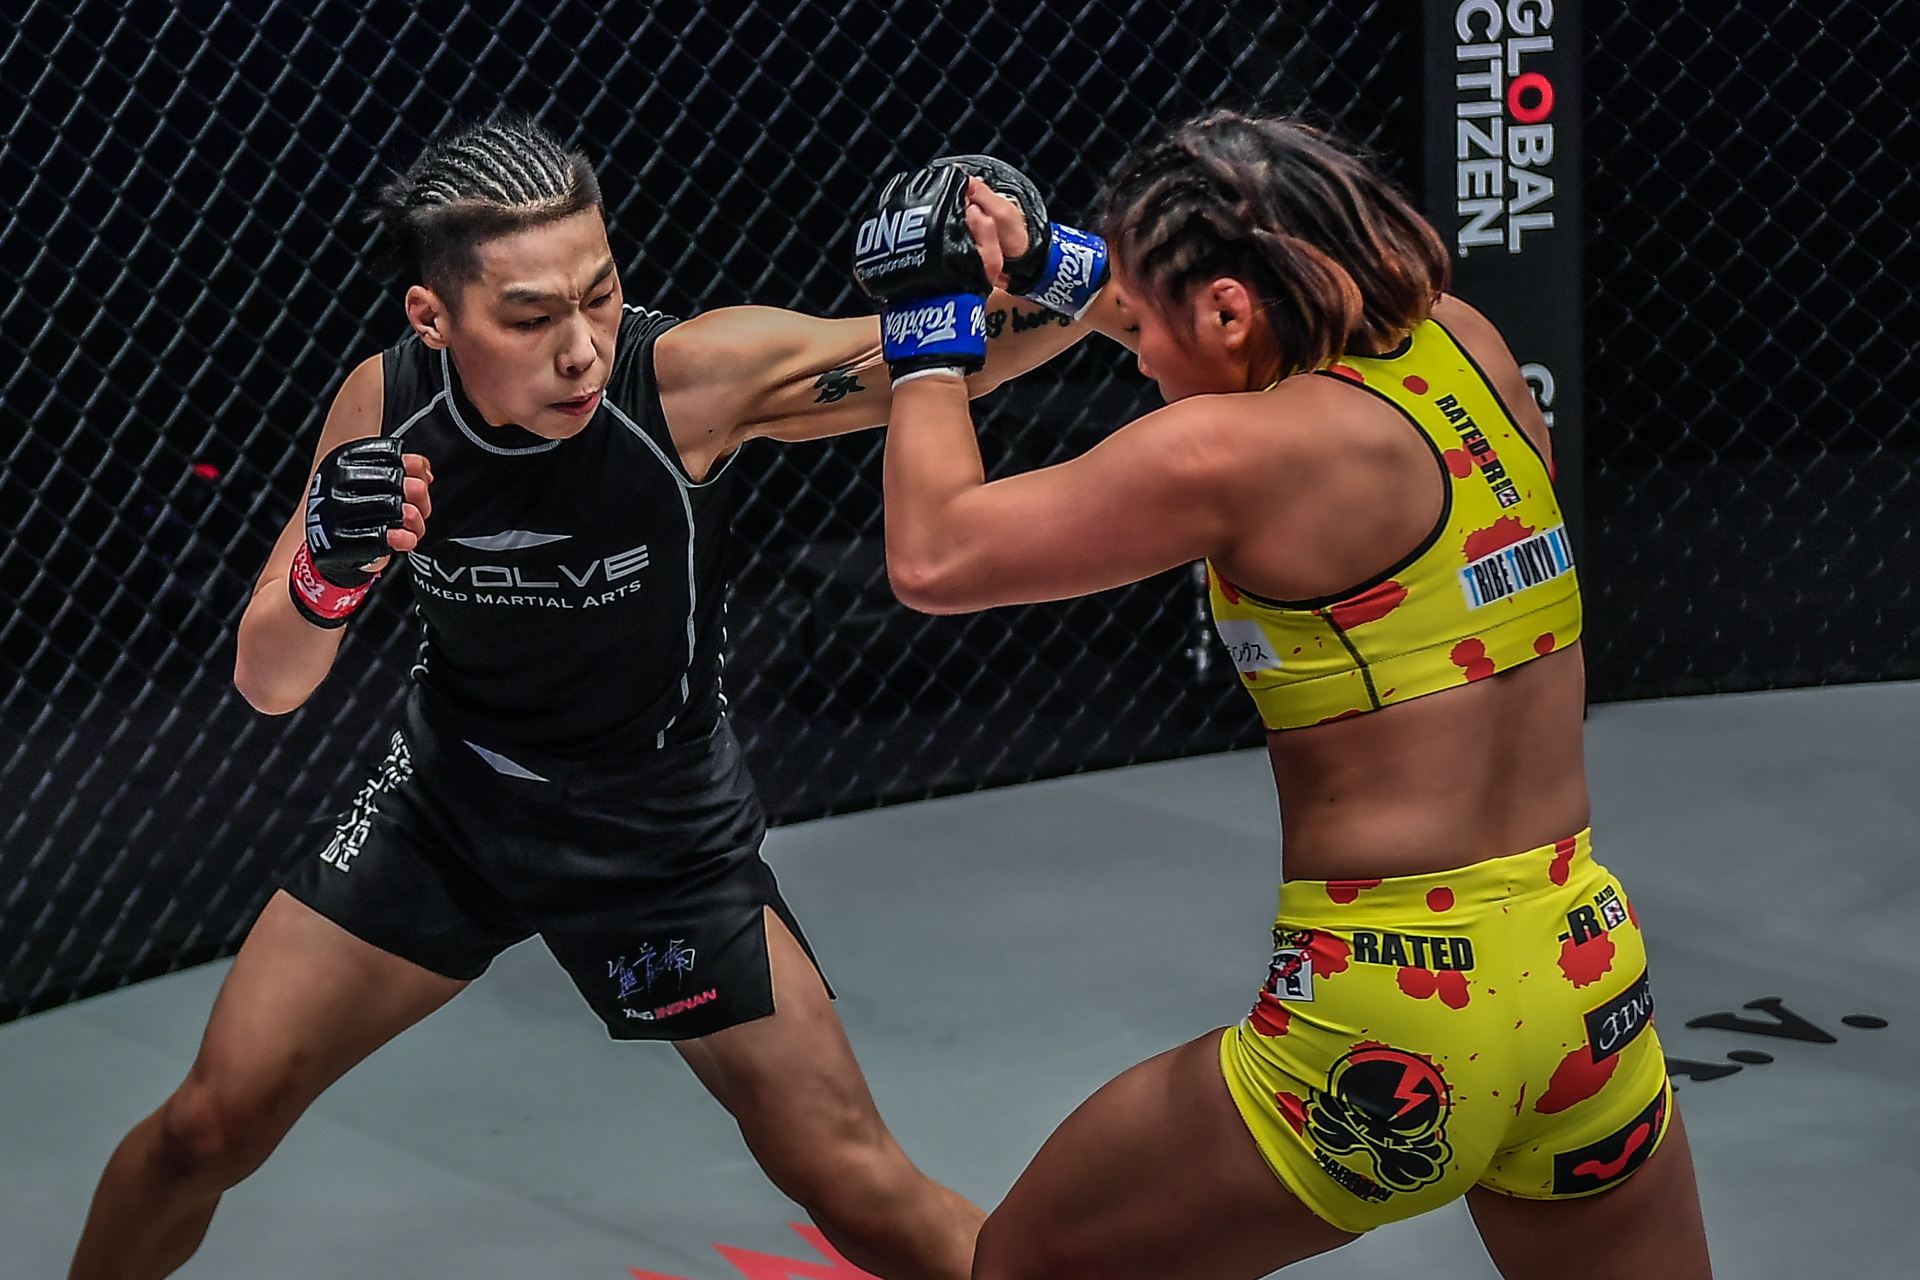 Xiong Jing Nan kept the heat turned up on Ayaka Miura during their ONE: HEAVY HITTERS main event clash.